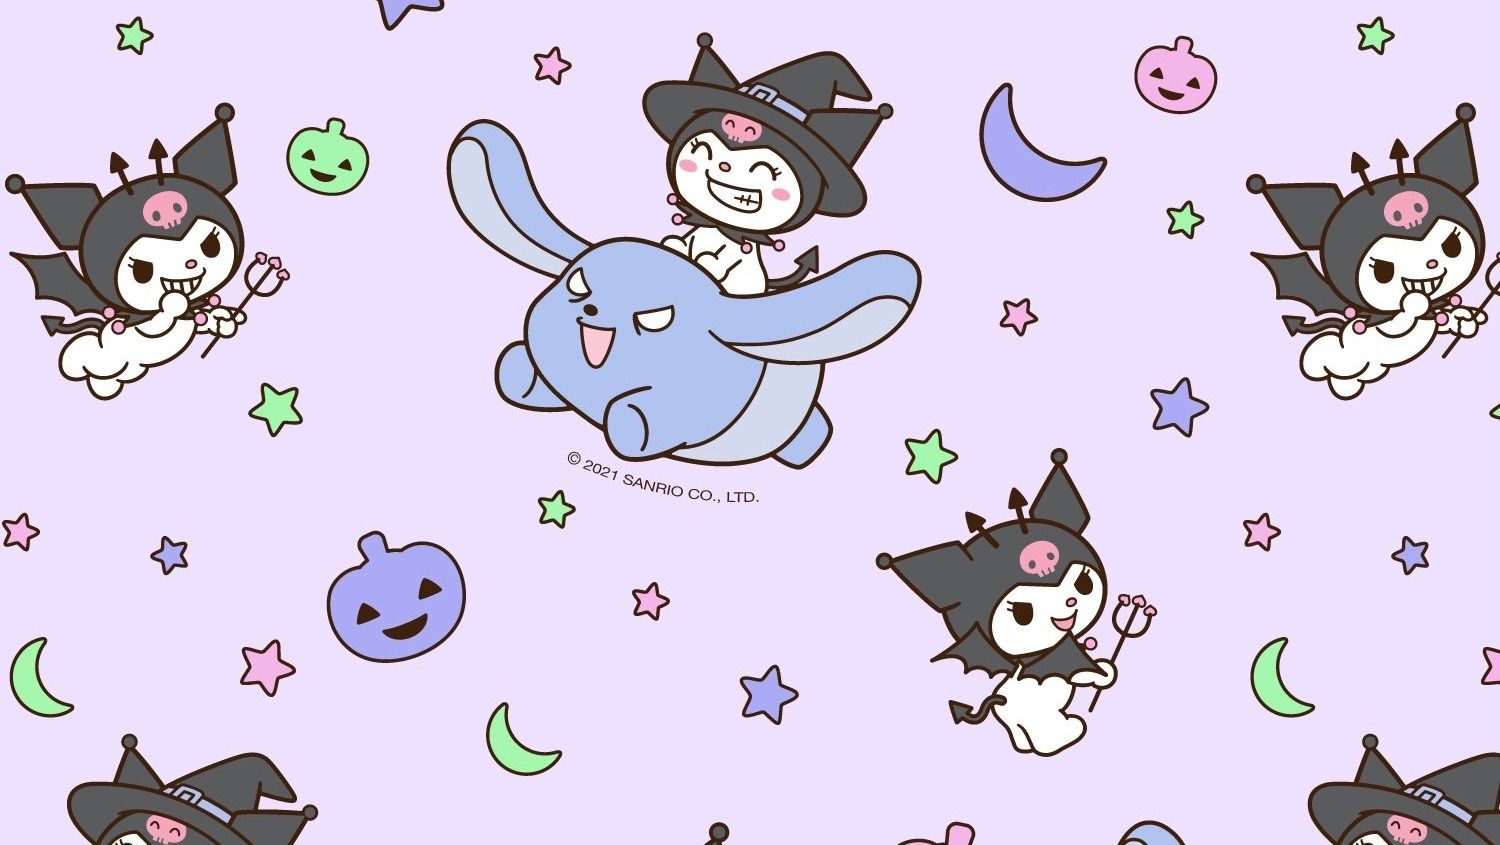 Sanrio characters in Halloween costumes on a purple background - Sanrio